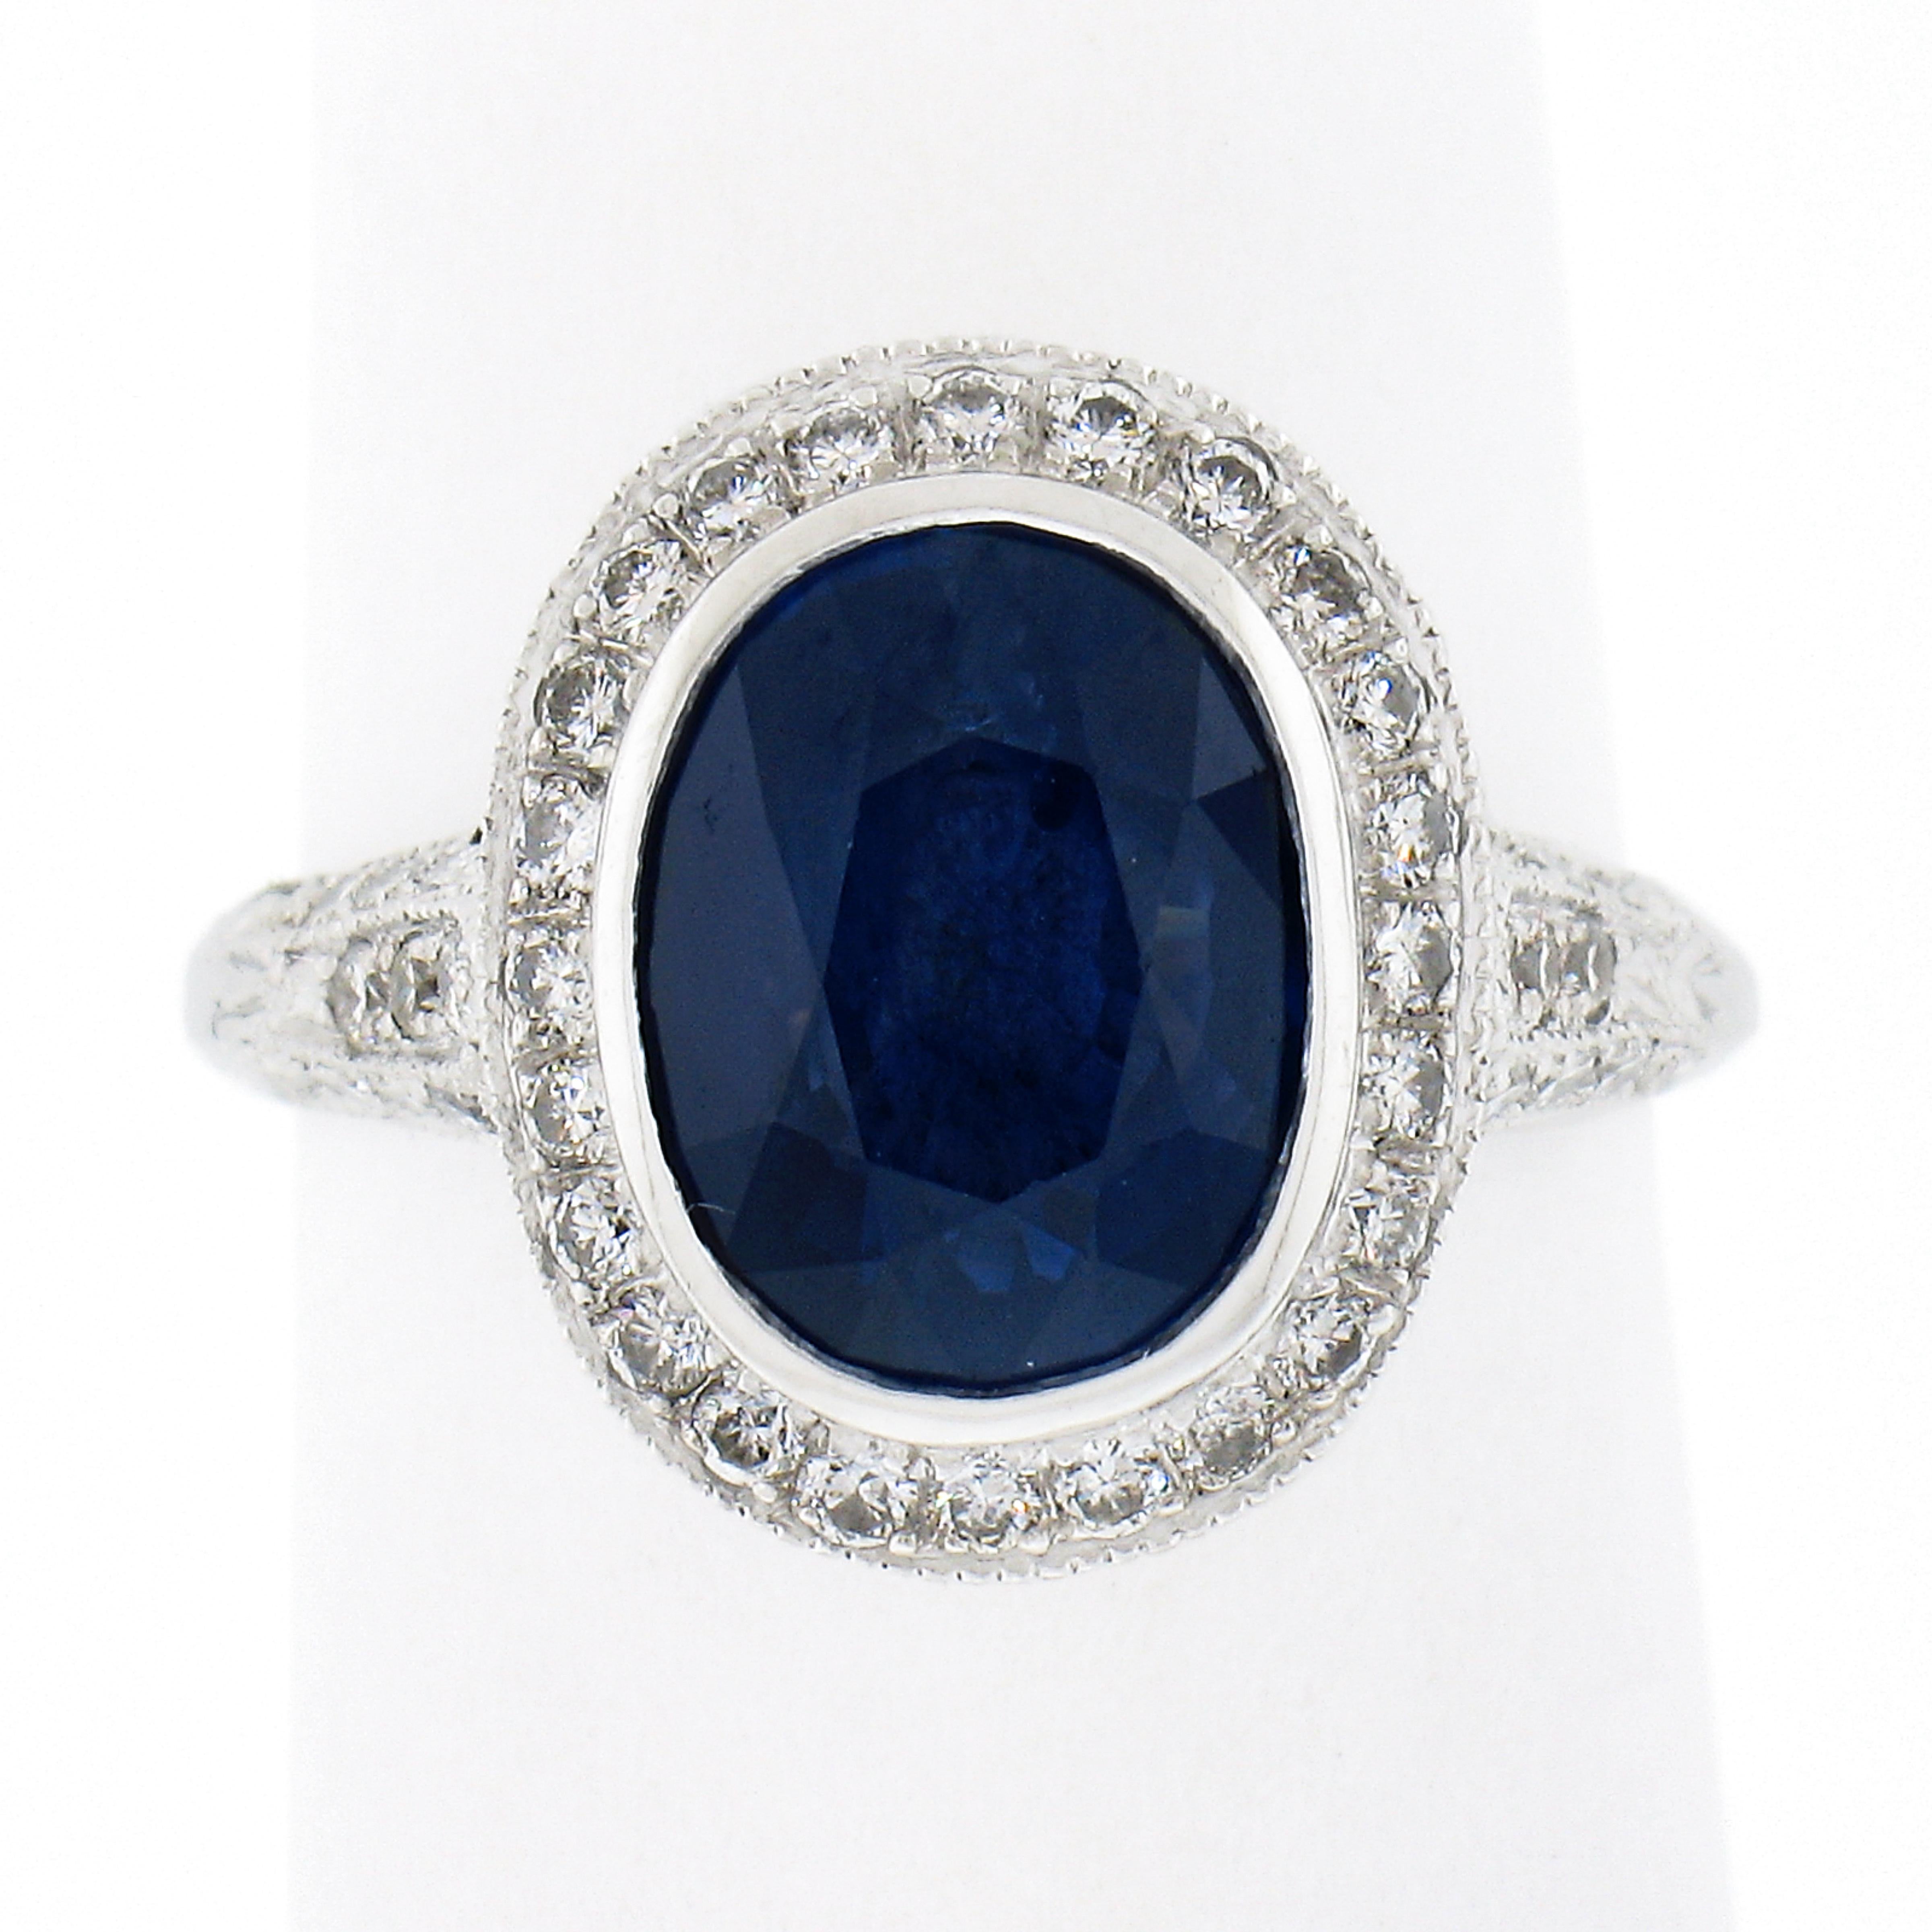 This stunning sapphire and diamond ring is crafted in solid platinum and features a beautiful, GIA certified, natural genuine sapphire neatly bezel set at the center of a raised diamond halo design. This oval brilliant cut sapphire has an attractive